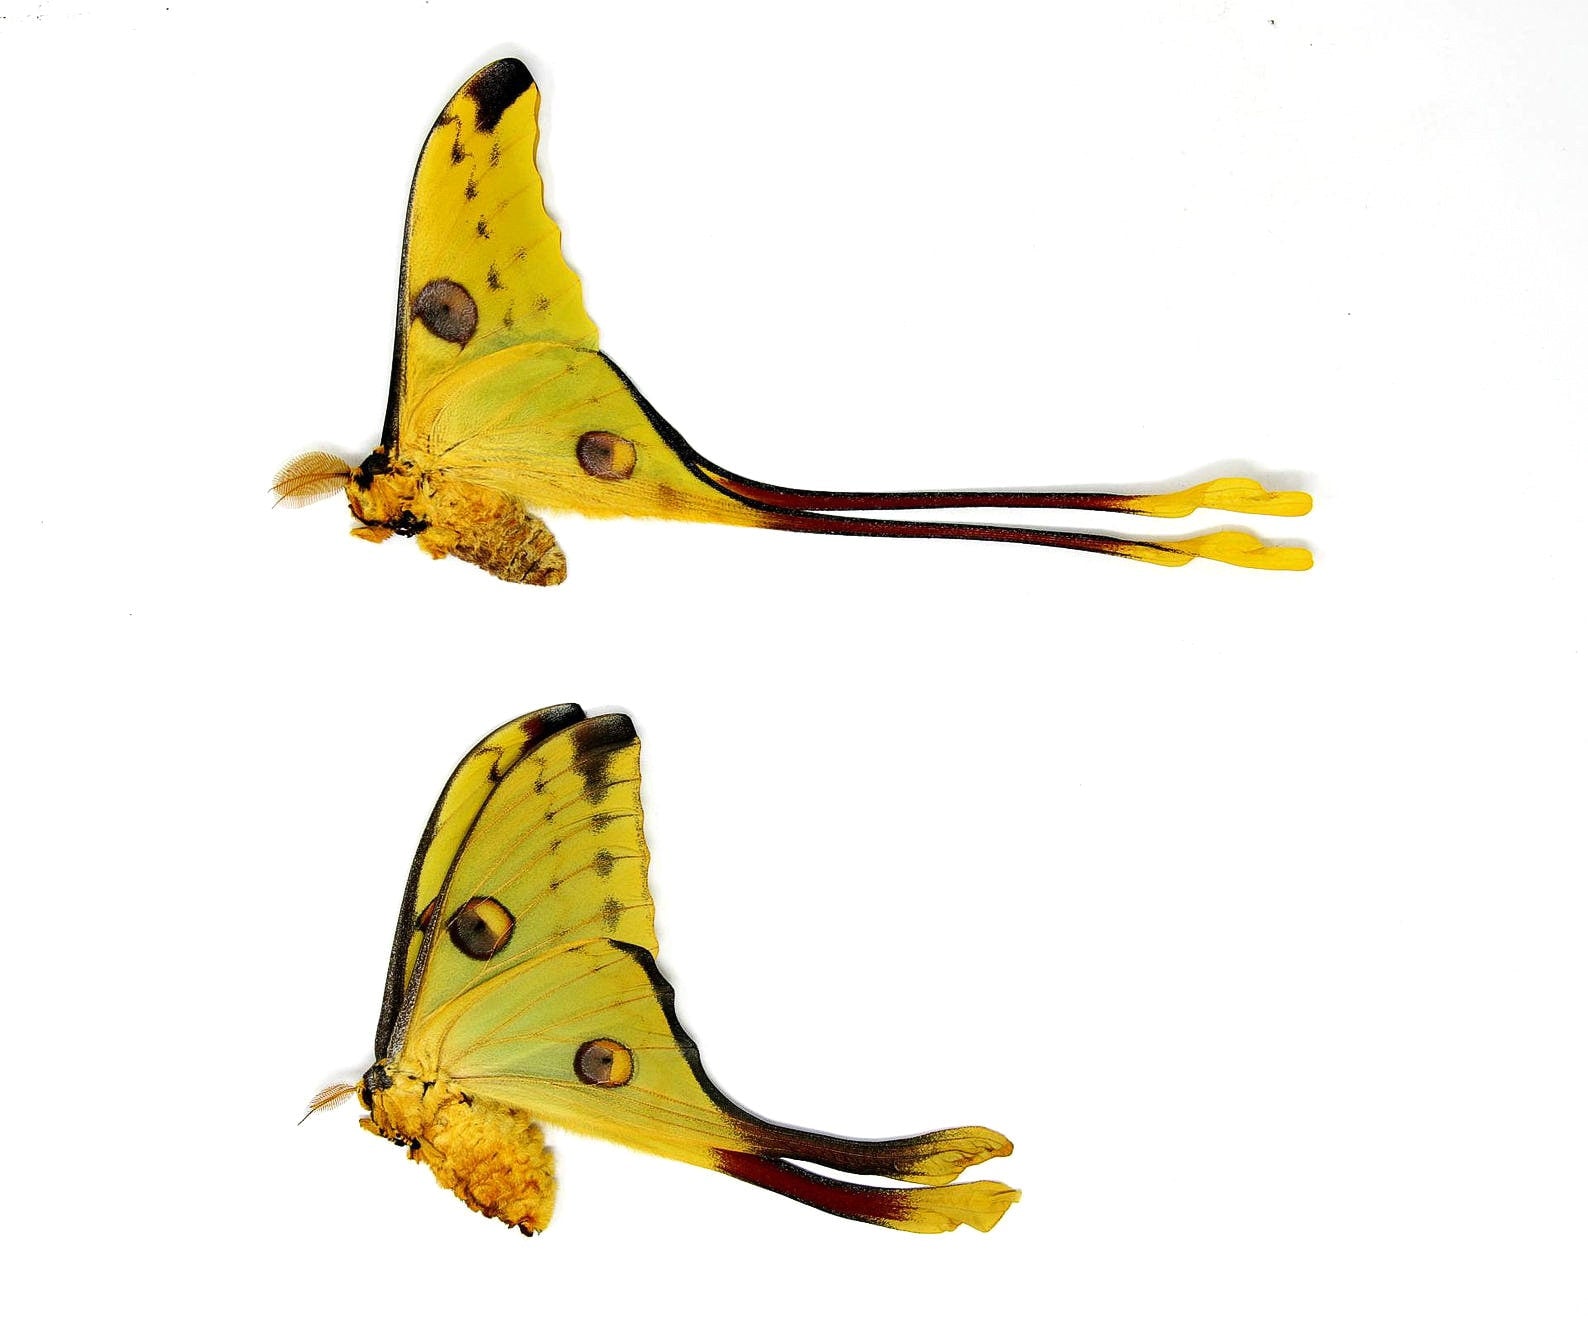 TWO (2) Madagascan Comet Moths PAIR (Argema mittrei) A1 Unmounted Specimens Ethically Sourced